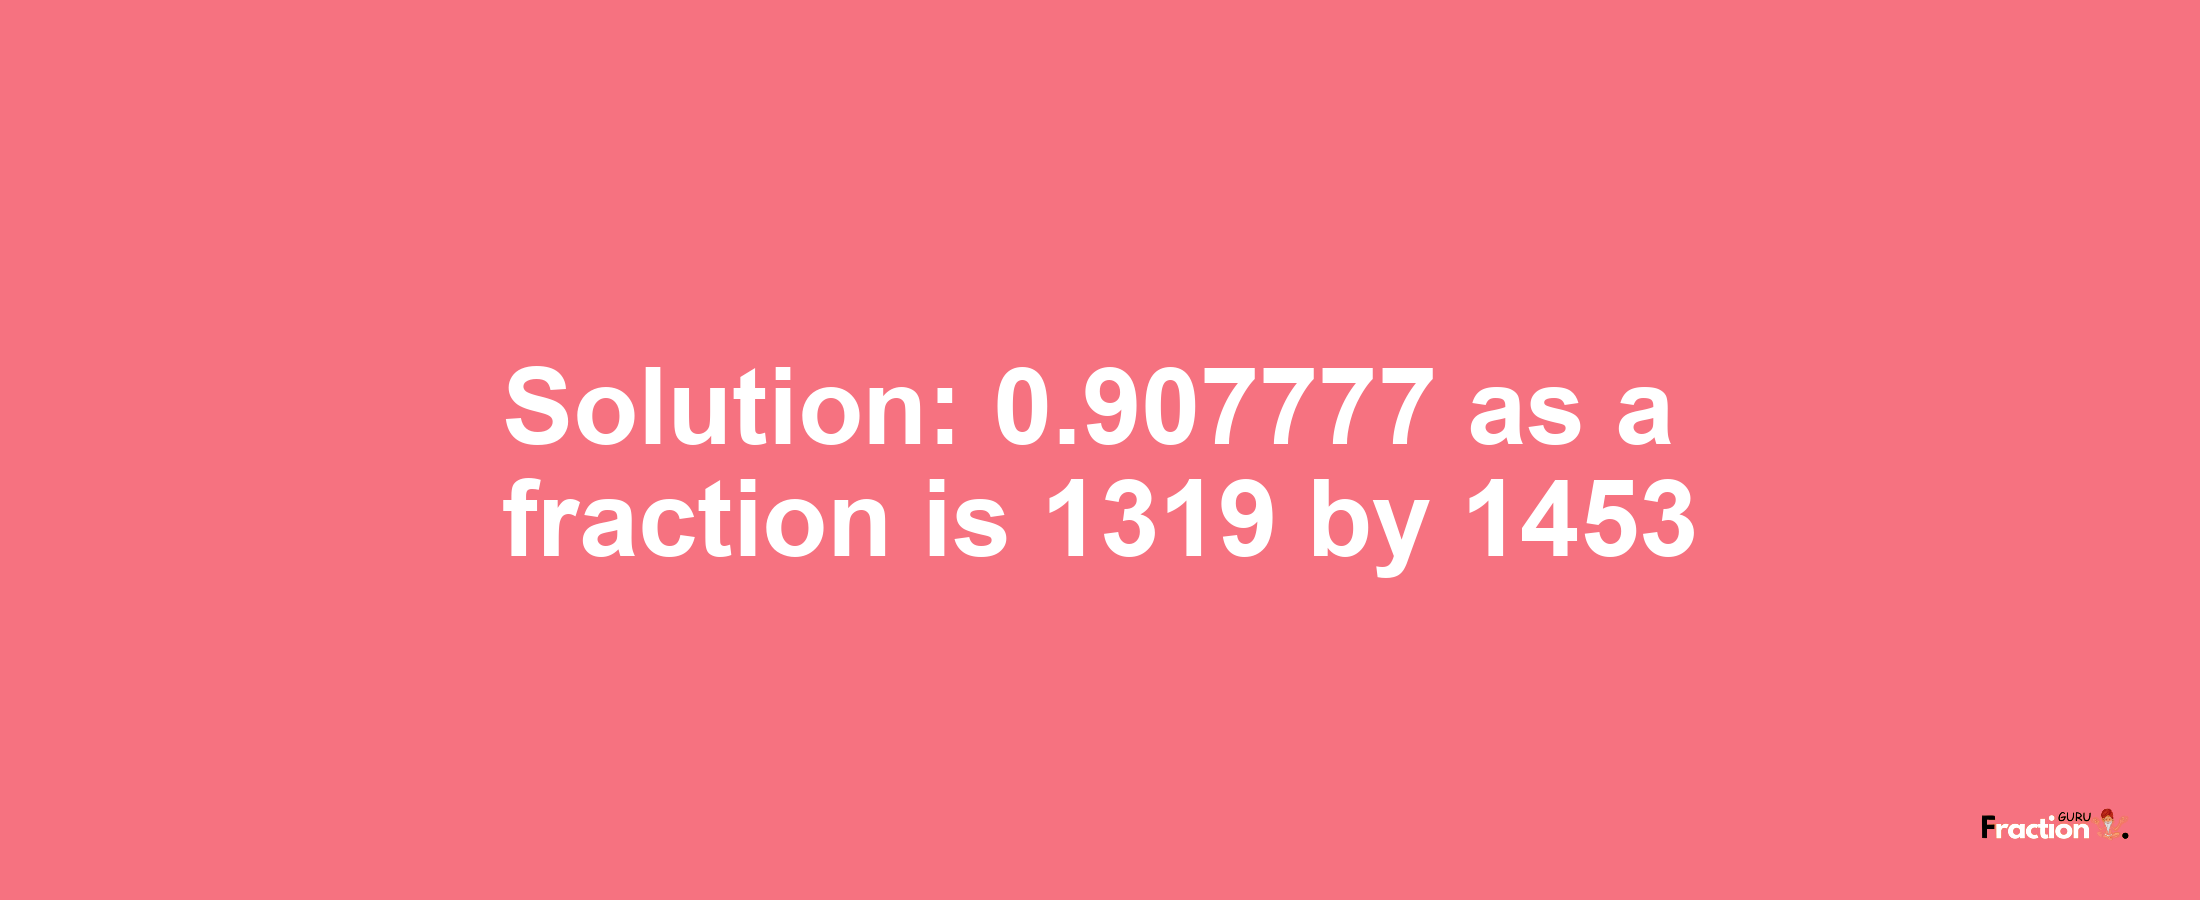 Solution:0.907777 as a fraction is 1319/1453